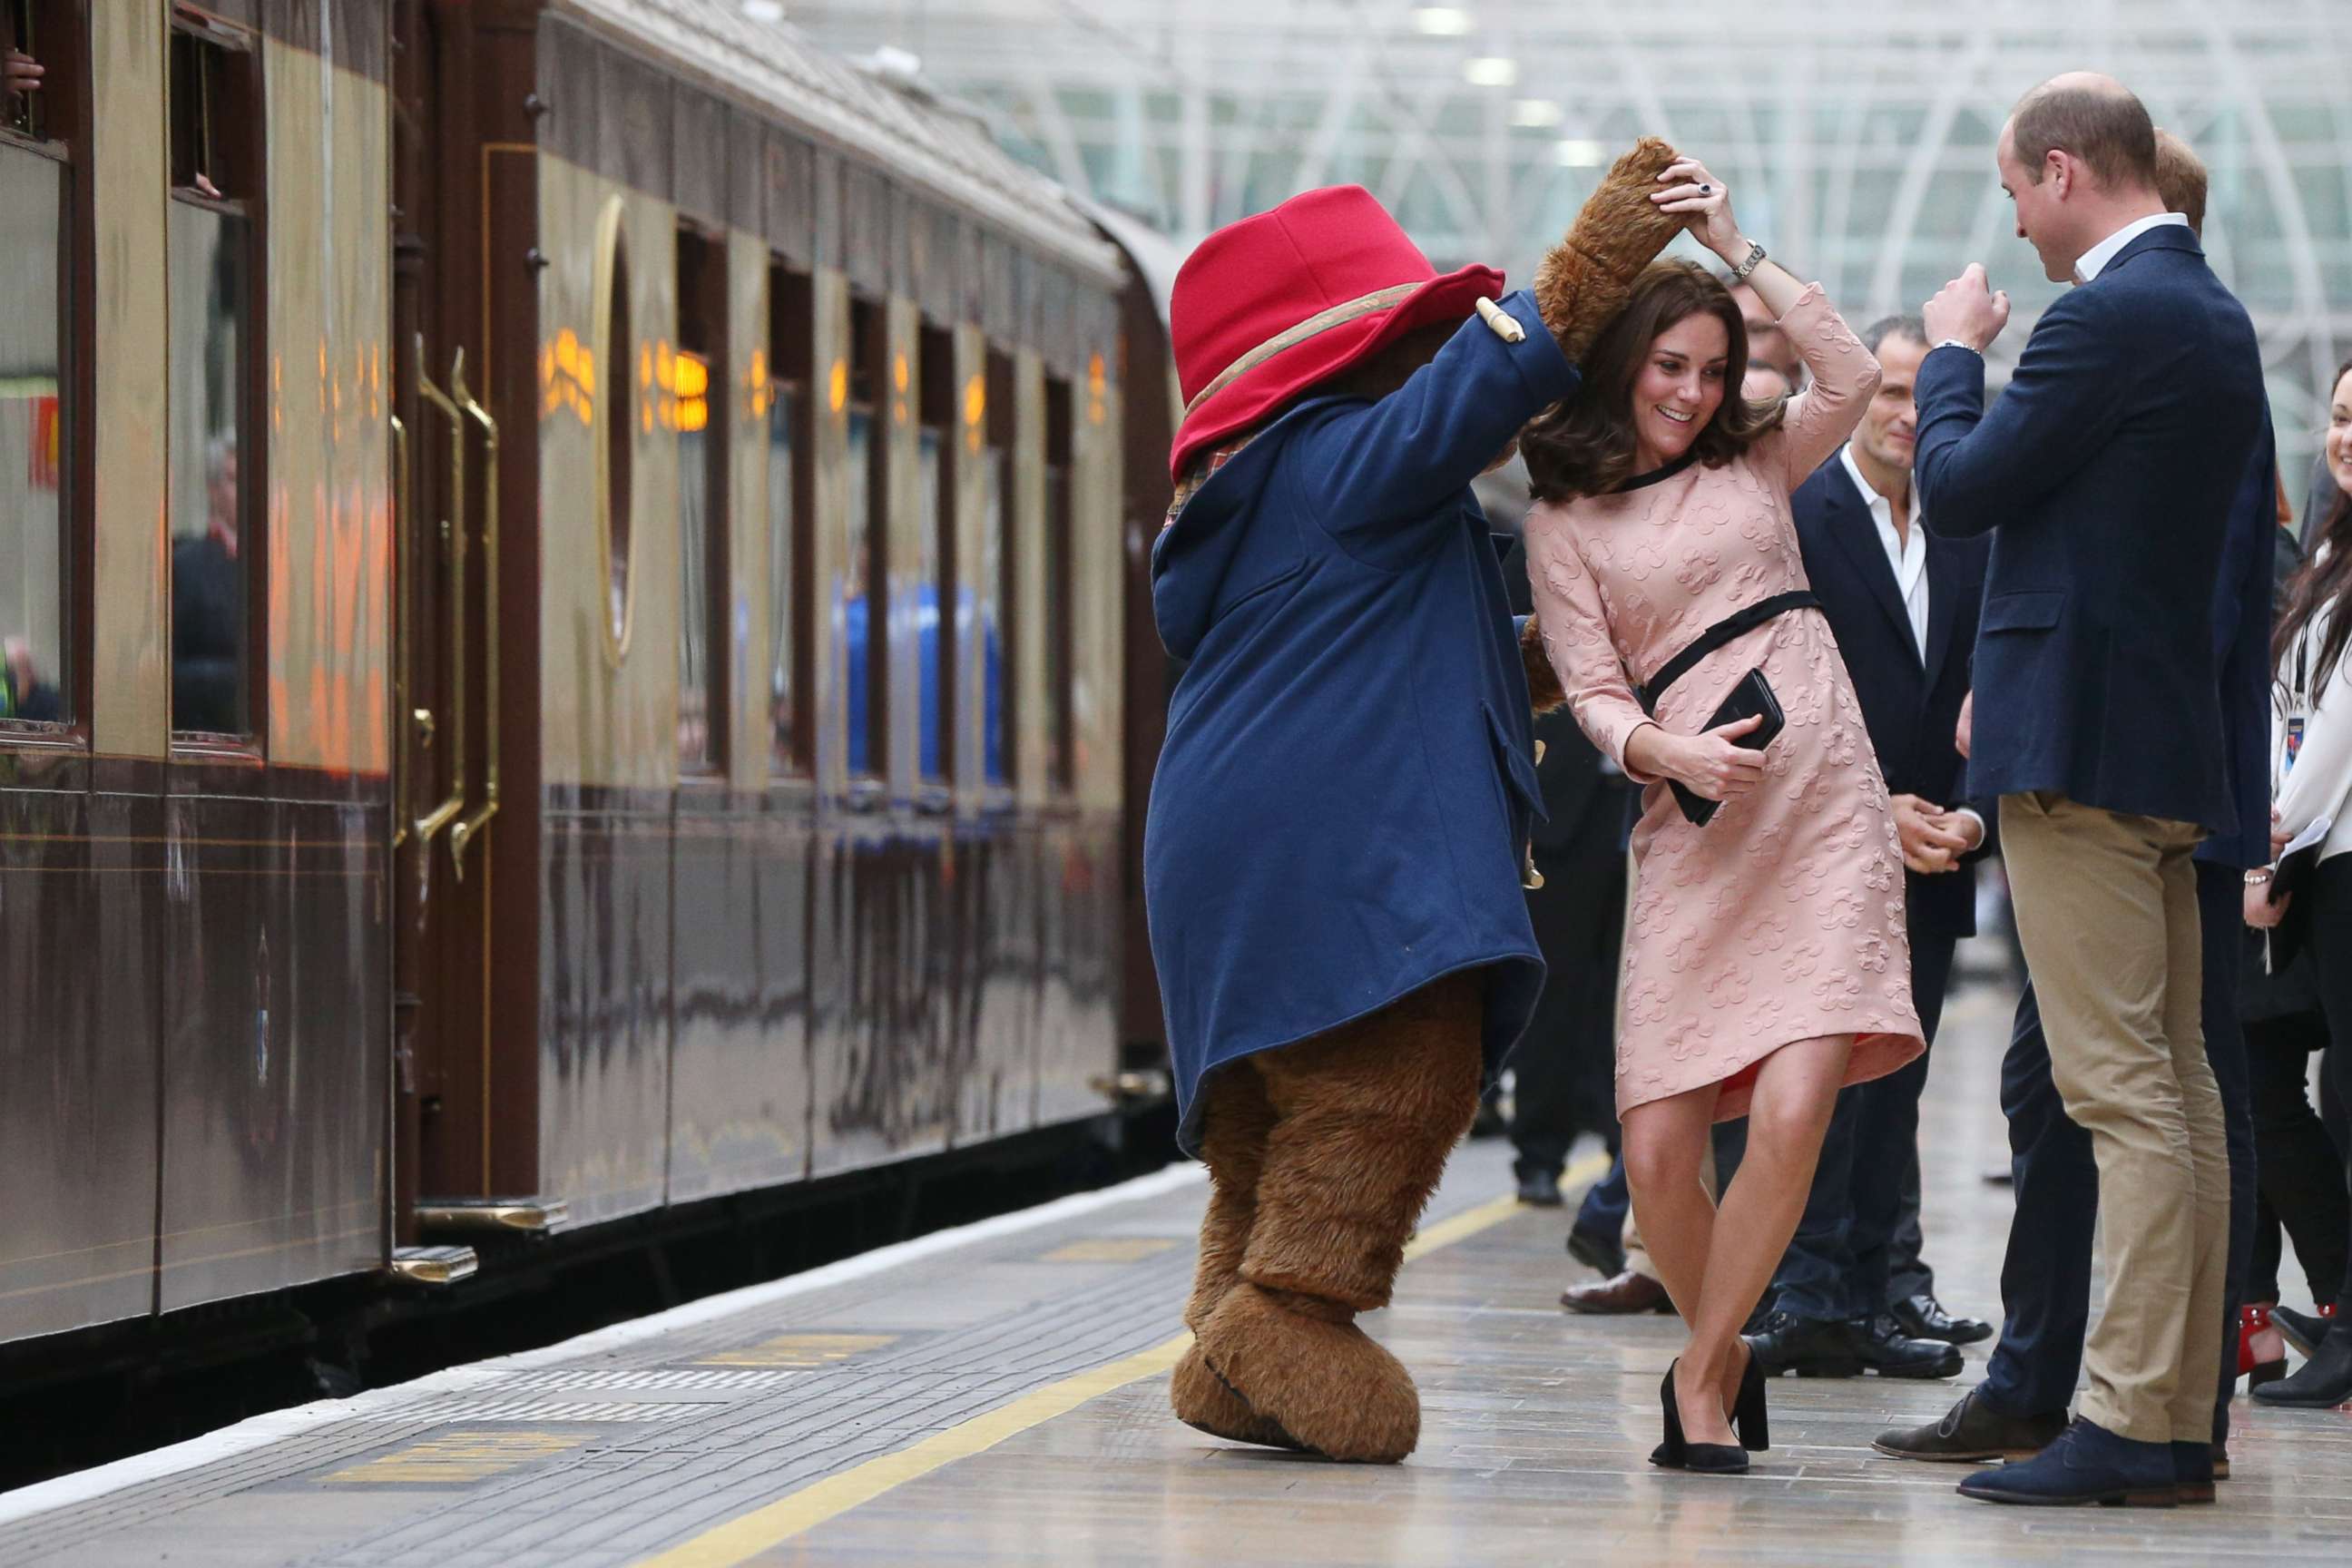 PHOTO: Catherine, Duchess of Cambridge dances with Paddington bear on platform 1 at Paddington Station as she meets the cast and crew from the forthcoming film Paddington 2 at Paddington Station on Oct. 16, 2017.